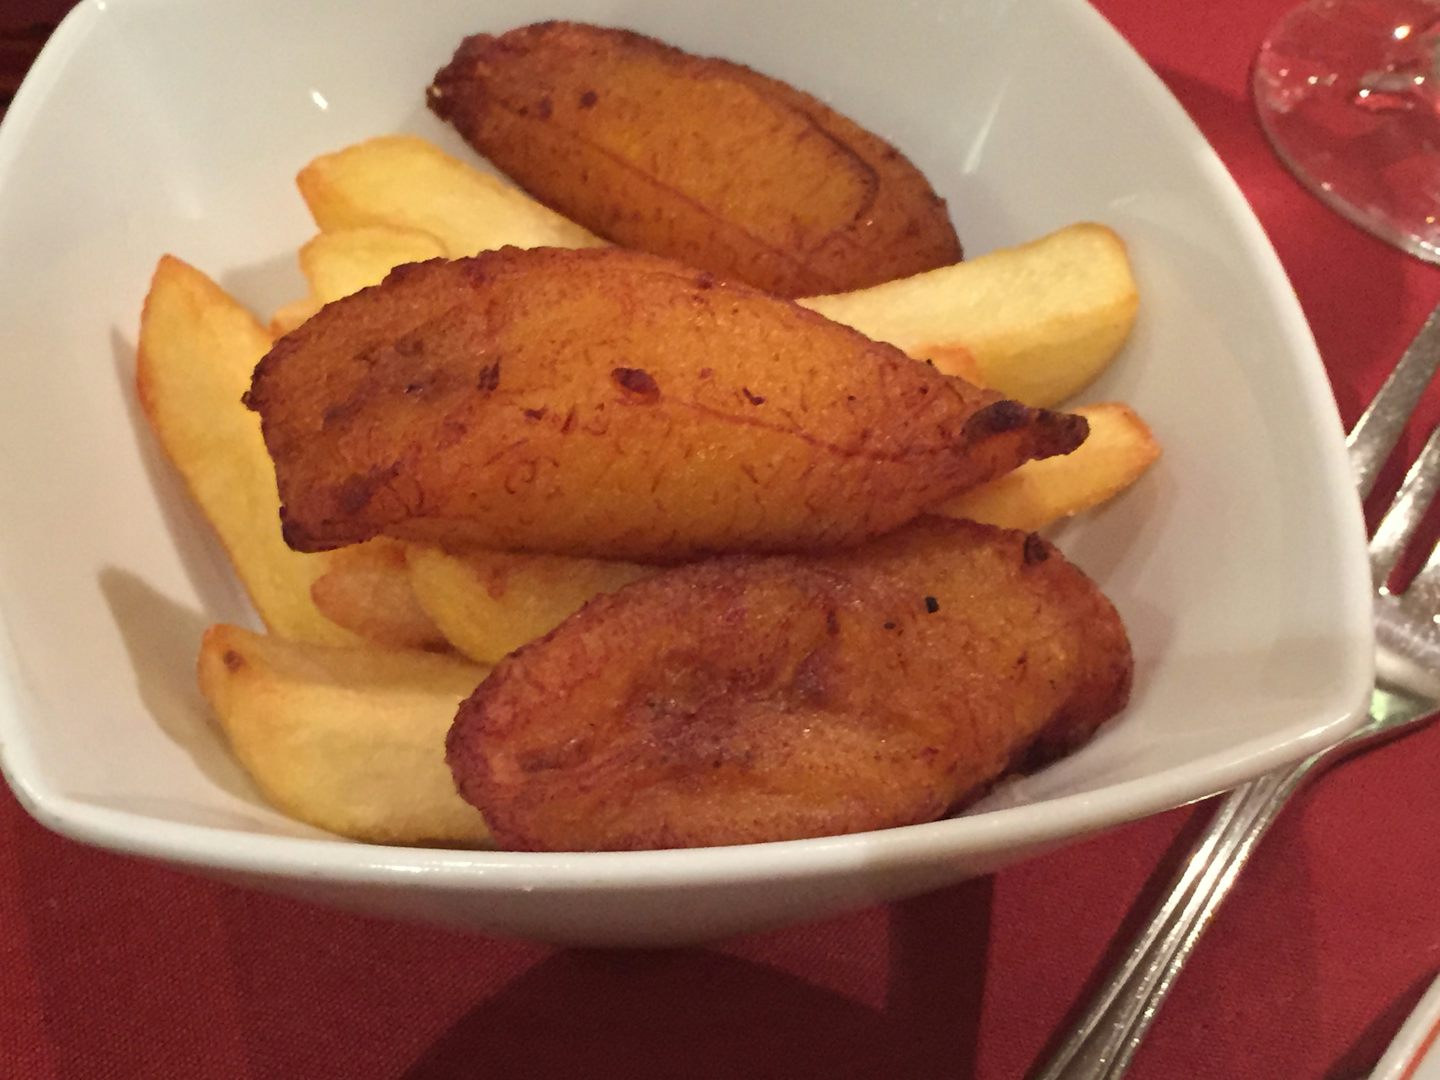 Brazilian restaurant chips and fried bananas. This is then followed by the different meats about 6 different types. There is also a buffet with yummy foods that I tried not to have as I had been here before. But no still started at buffet and couldn